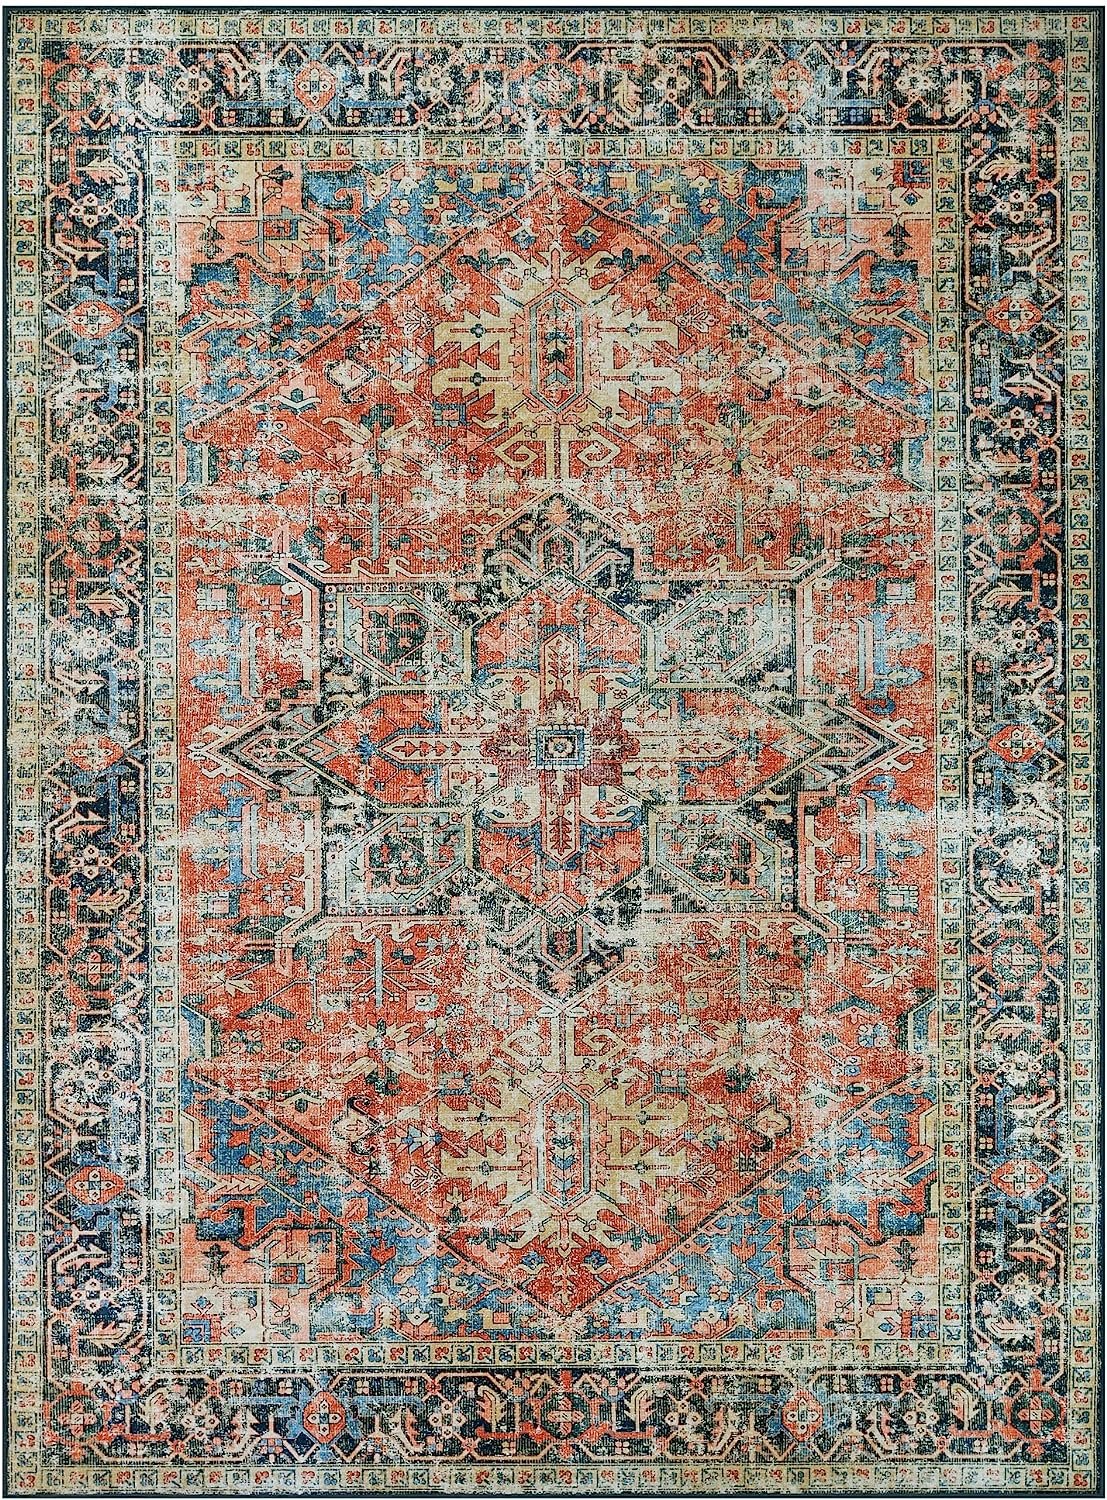 HR Print Bohemian Area Rug - Non-Slip Rubber Backing, Traditional Pattern,  Flat Texture, Polyester - On Sale - Bed Bath & Beyond - 38416210